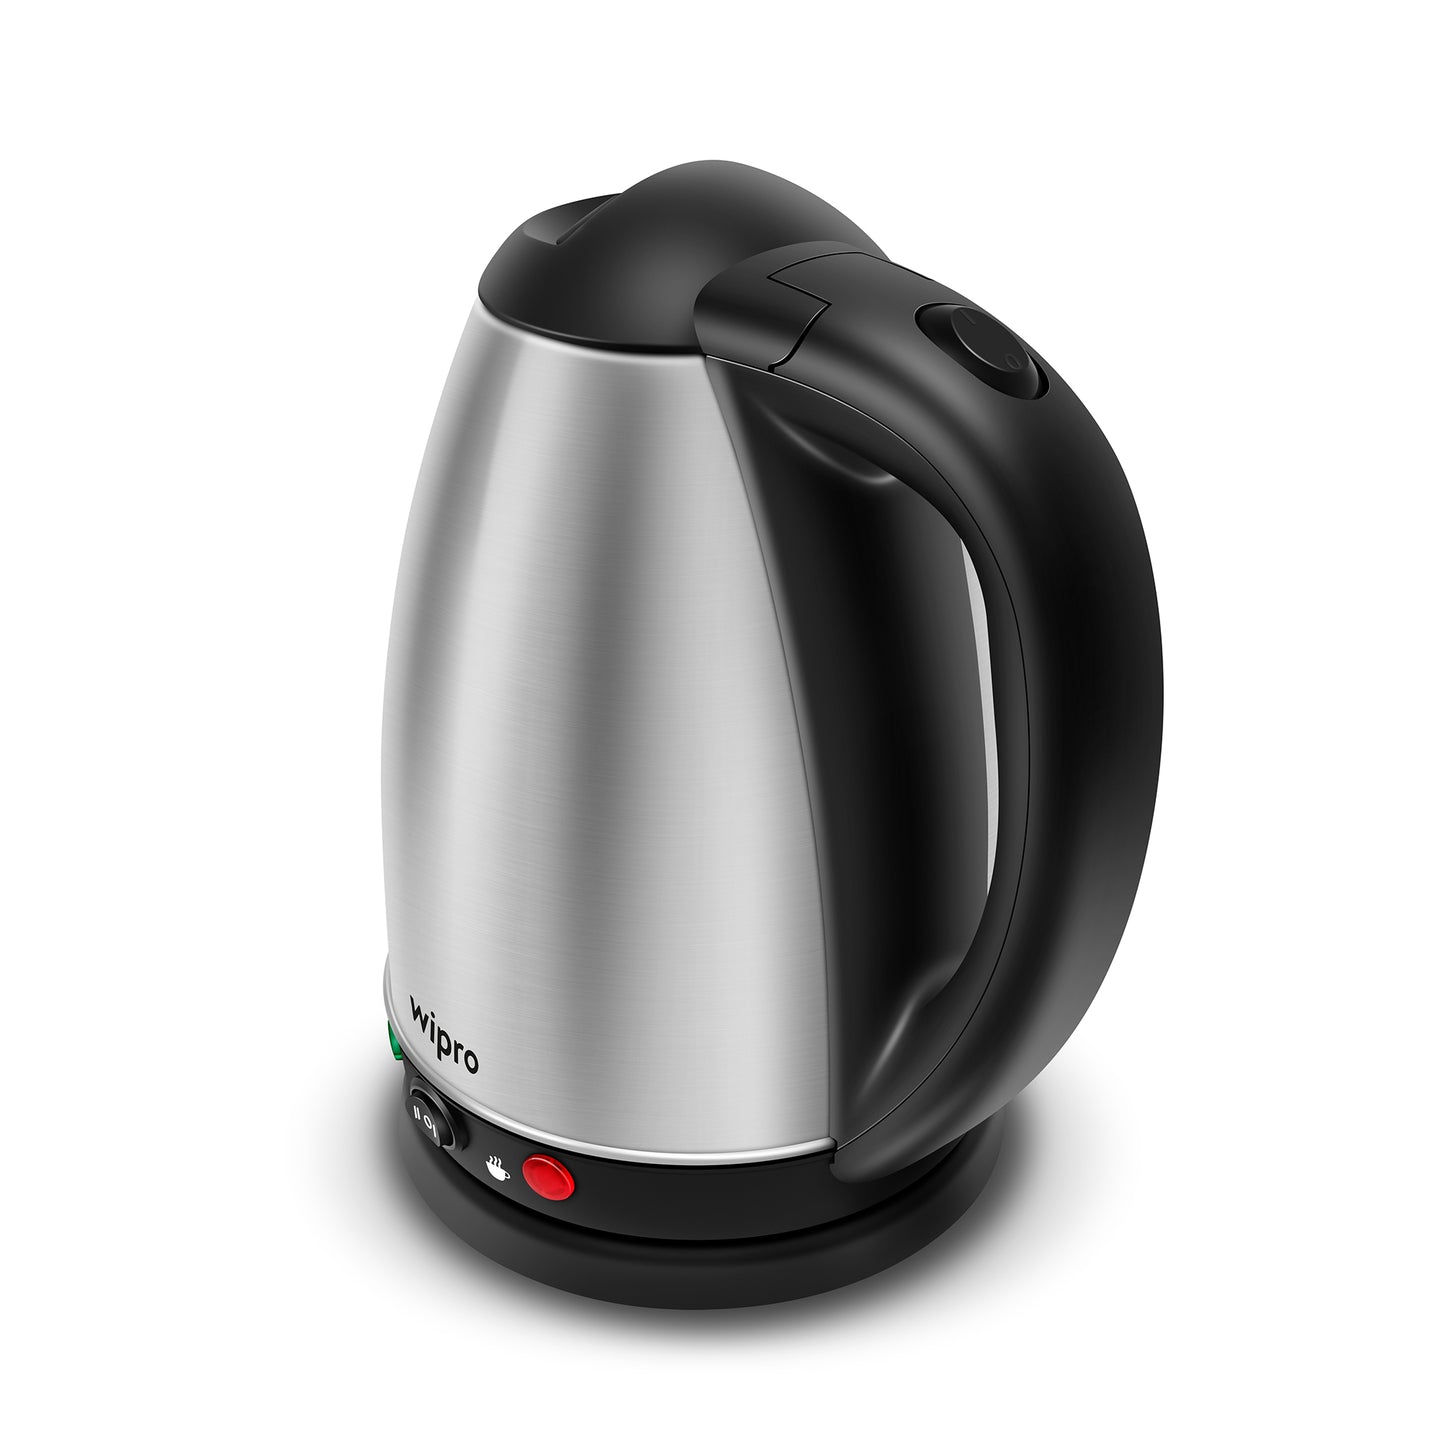 Wipro Vesta 1.8 Litre Ss Kettle With Keep Warm Function